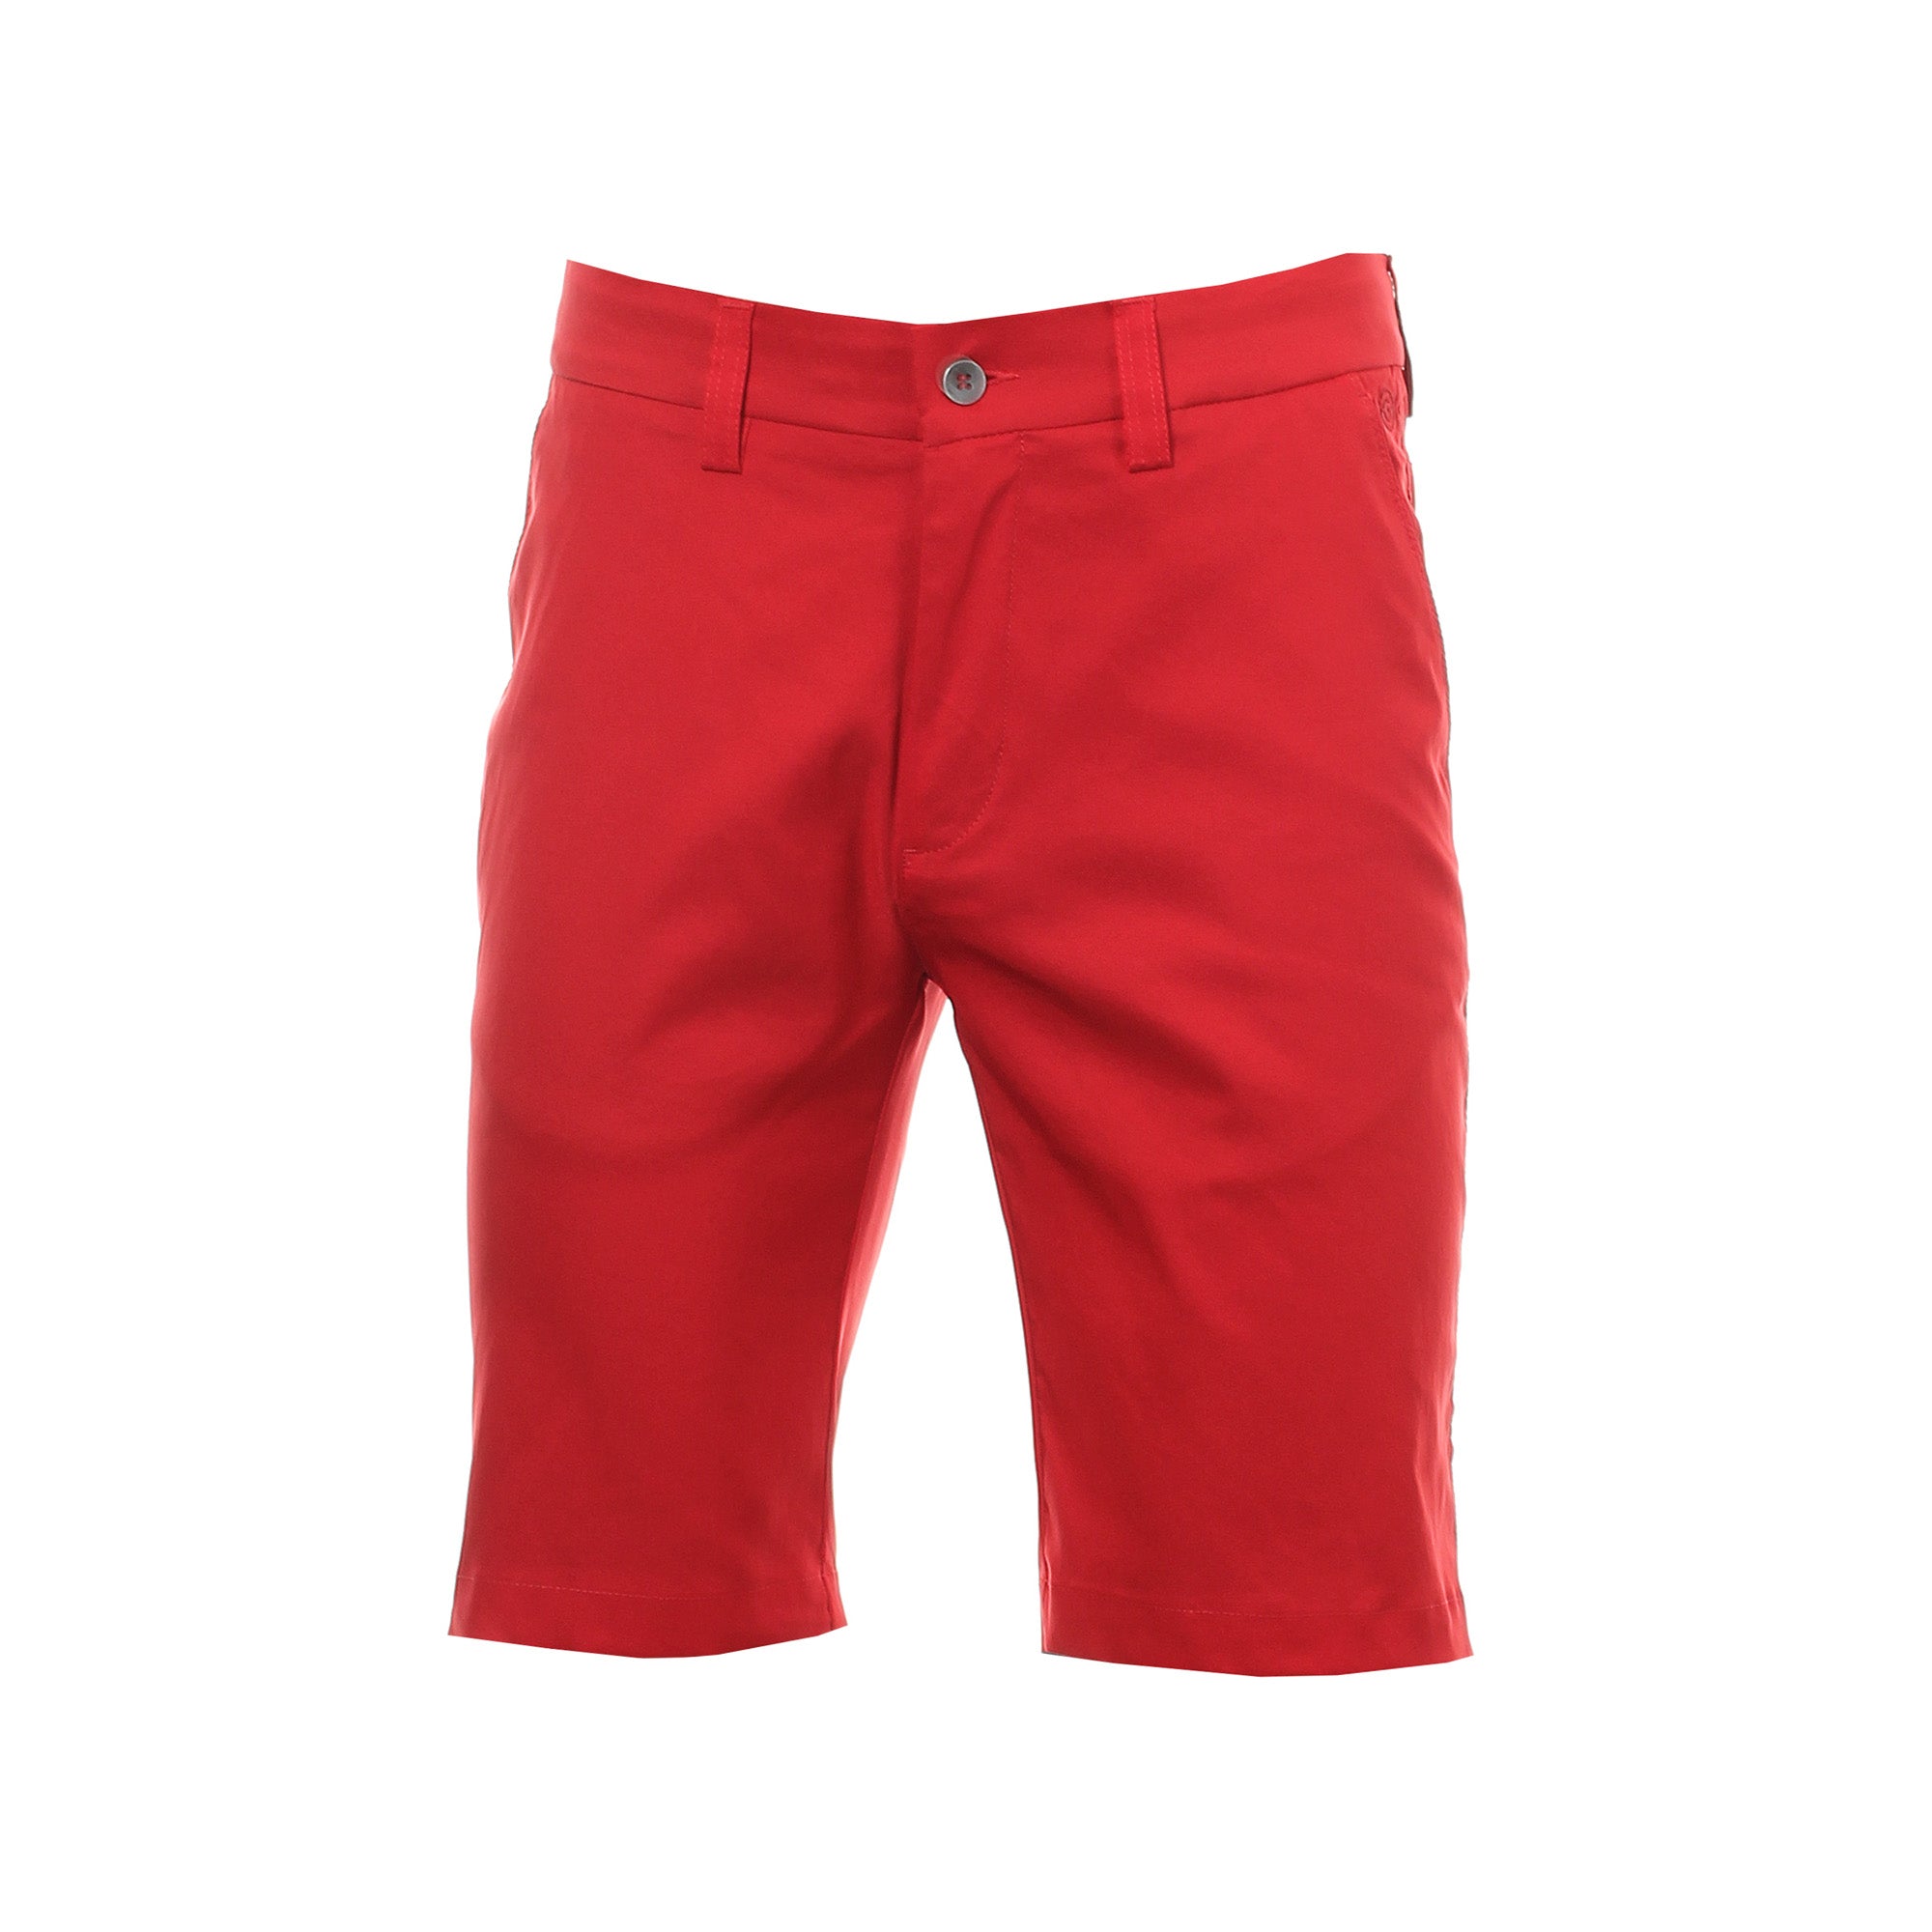 Galvin Green Paolo Ventil8+ Golf Shorts Red 22 | Function18 | Restrictedgs